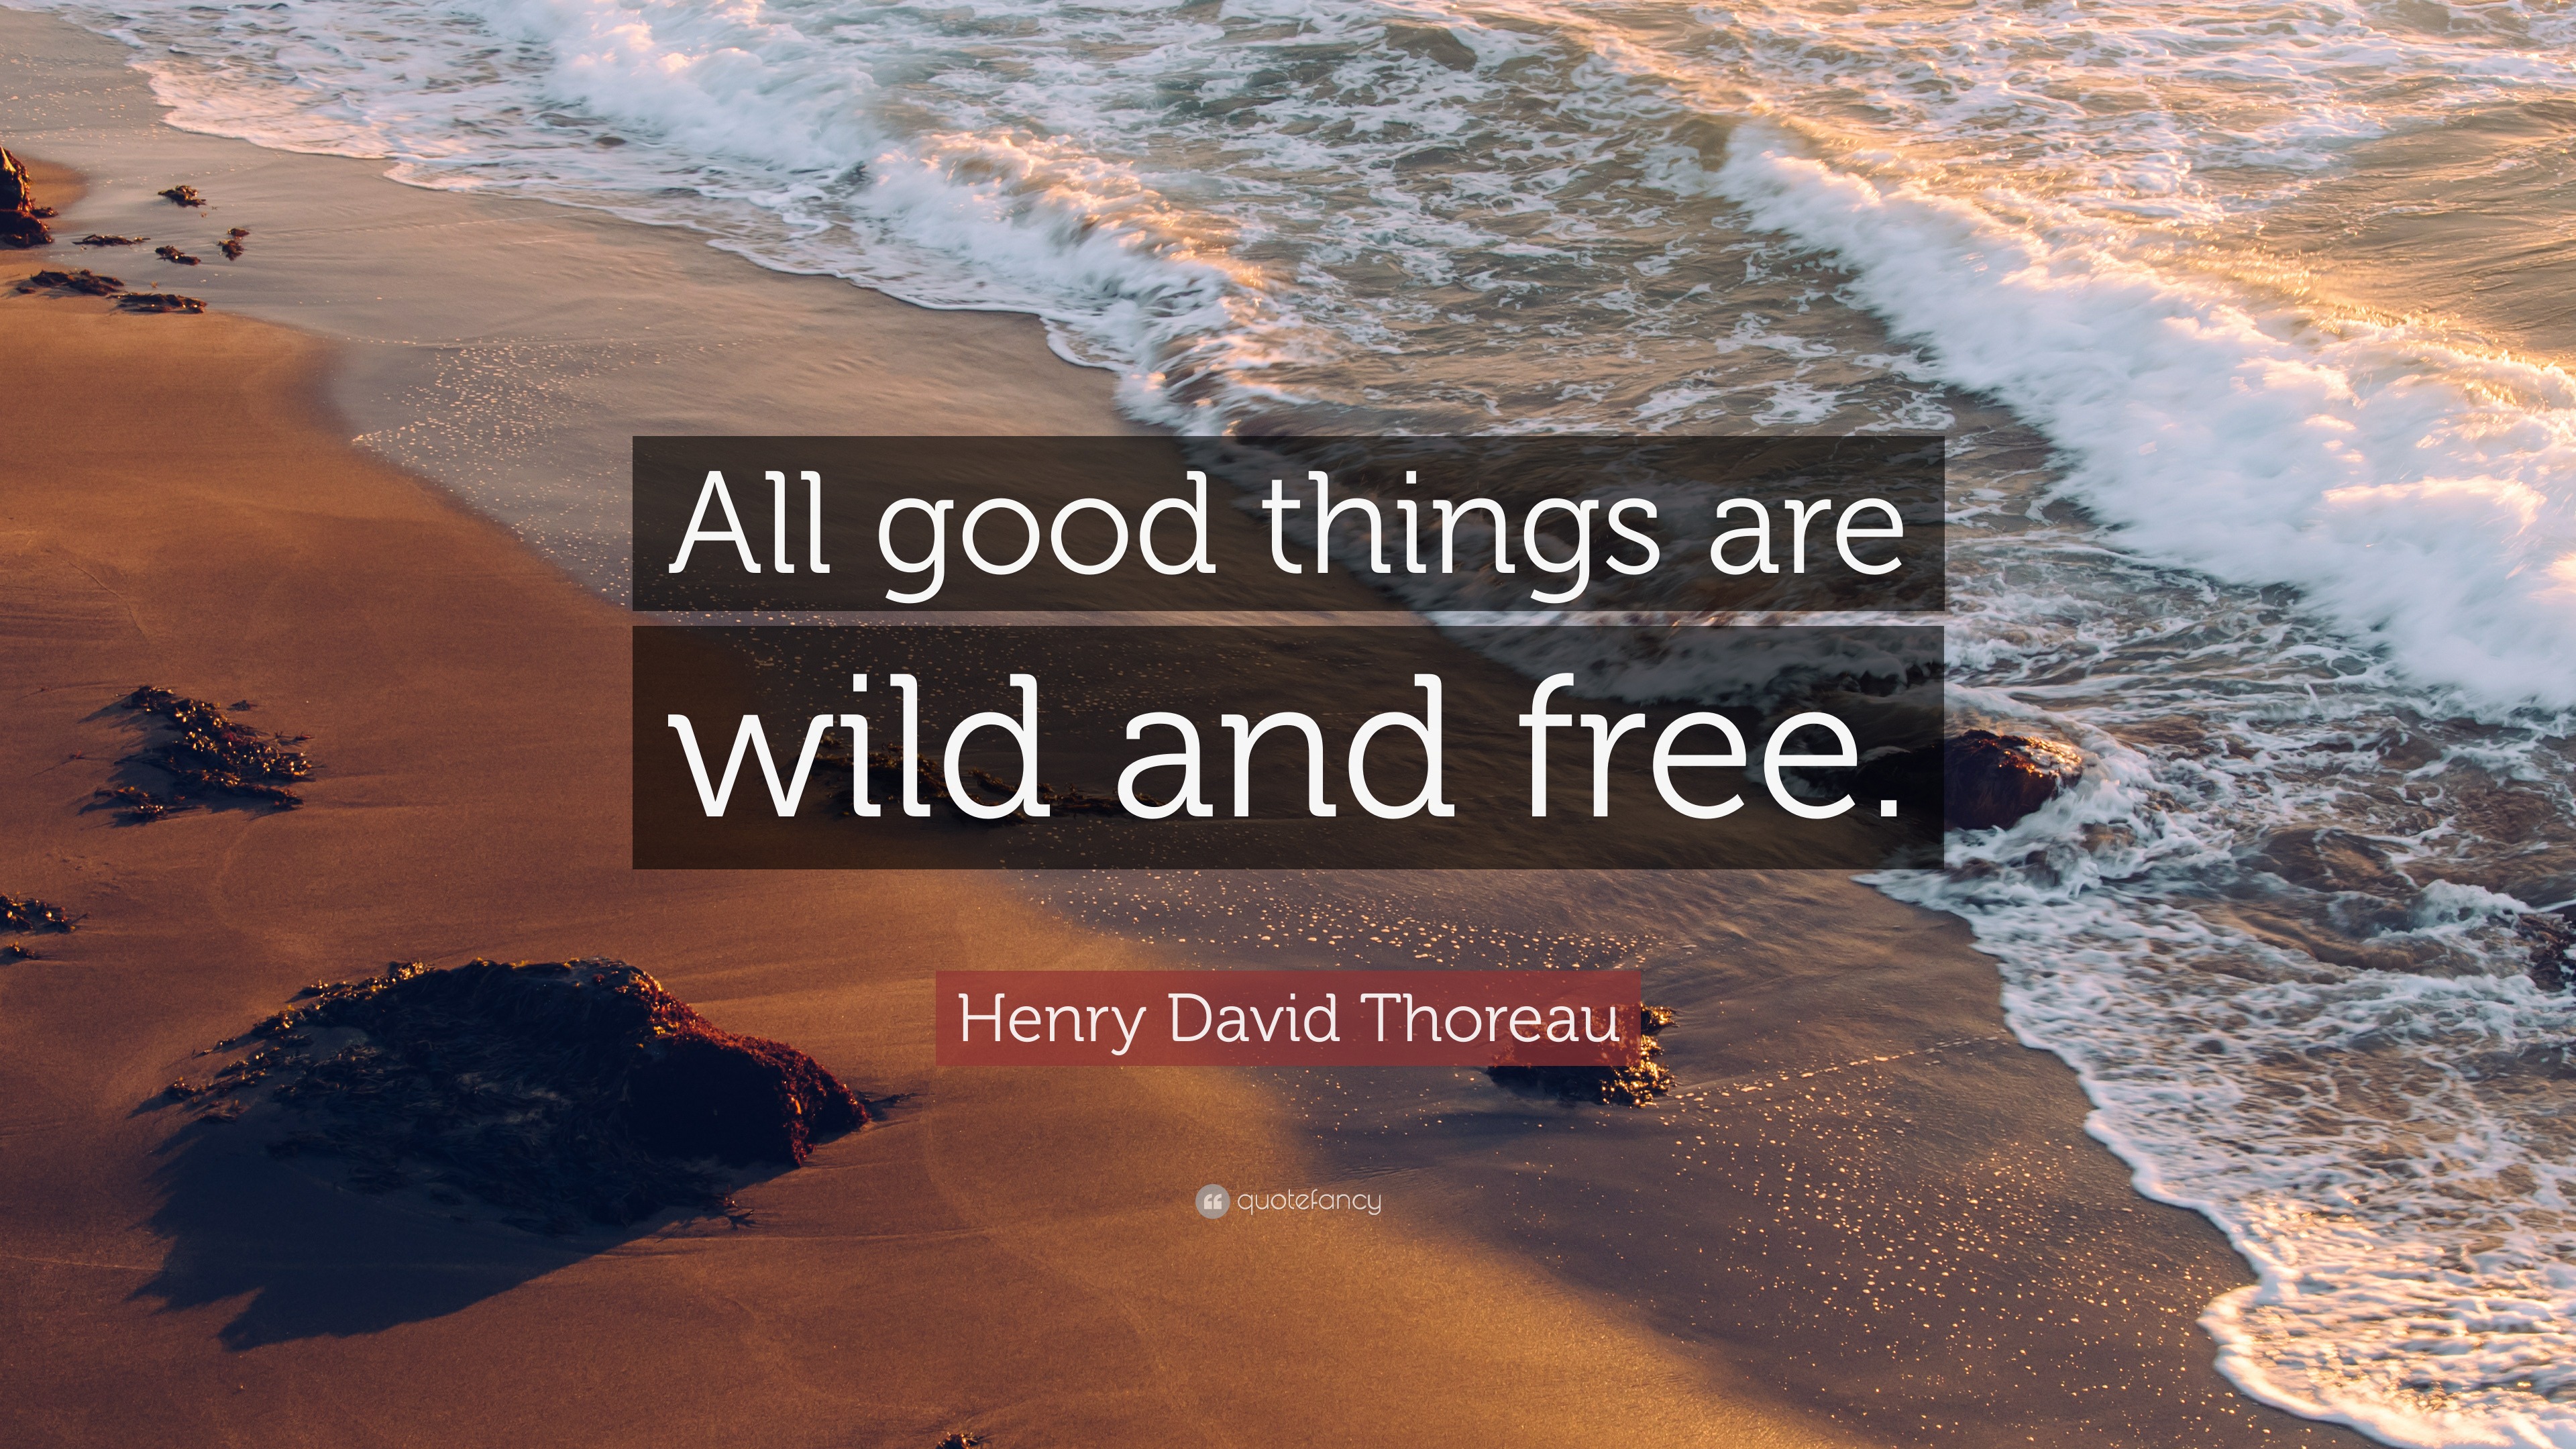 Henry David Thoreau Quote: "All good things are wild and ...